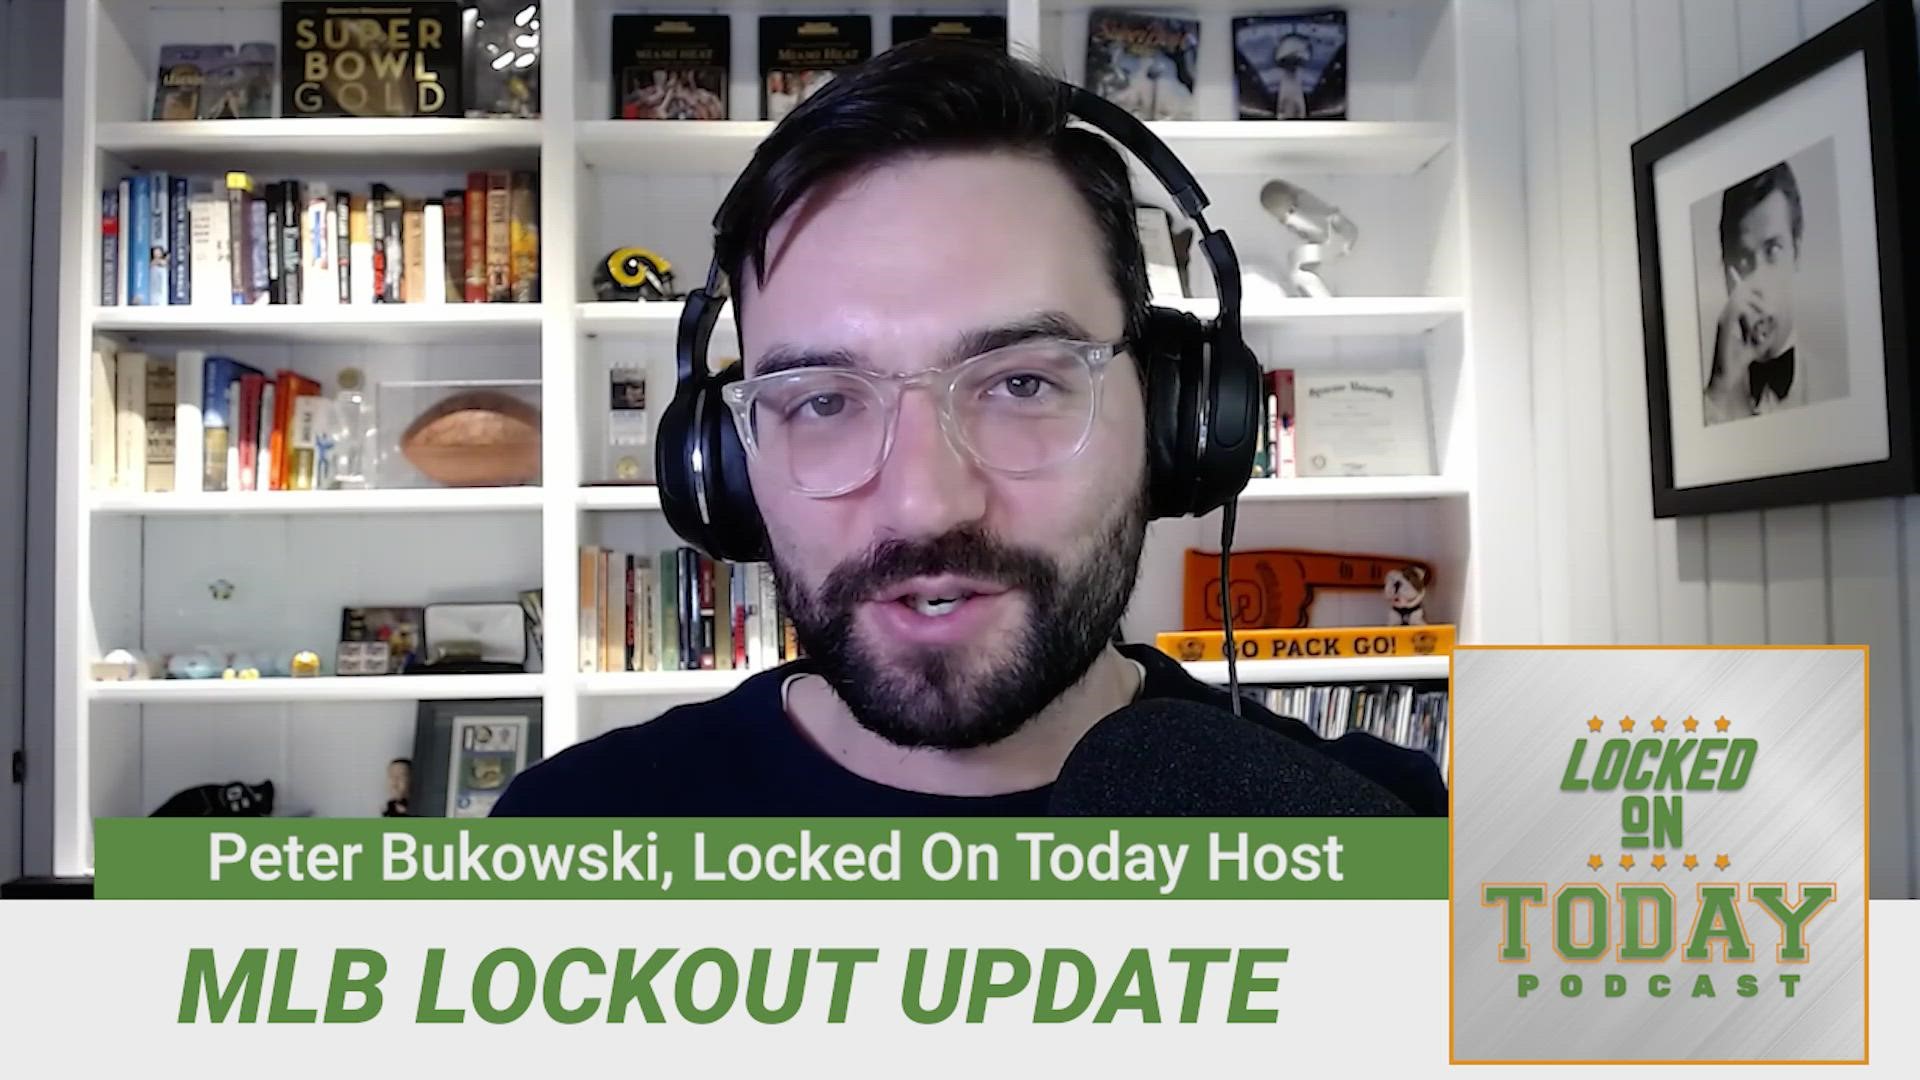 Jeff Carr of the Locked On Reds podcast joined Peter Bukowski to discuss where we're at with baseball's lockout and where we're going.